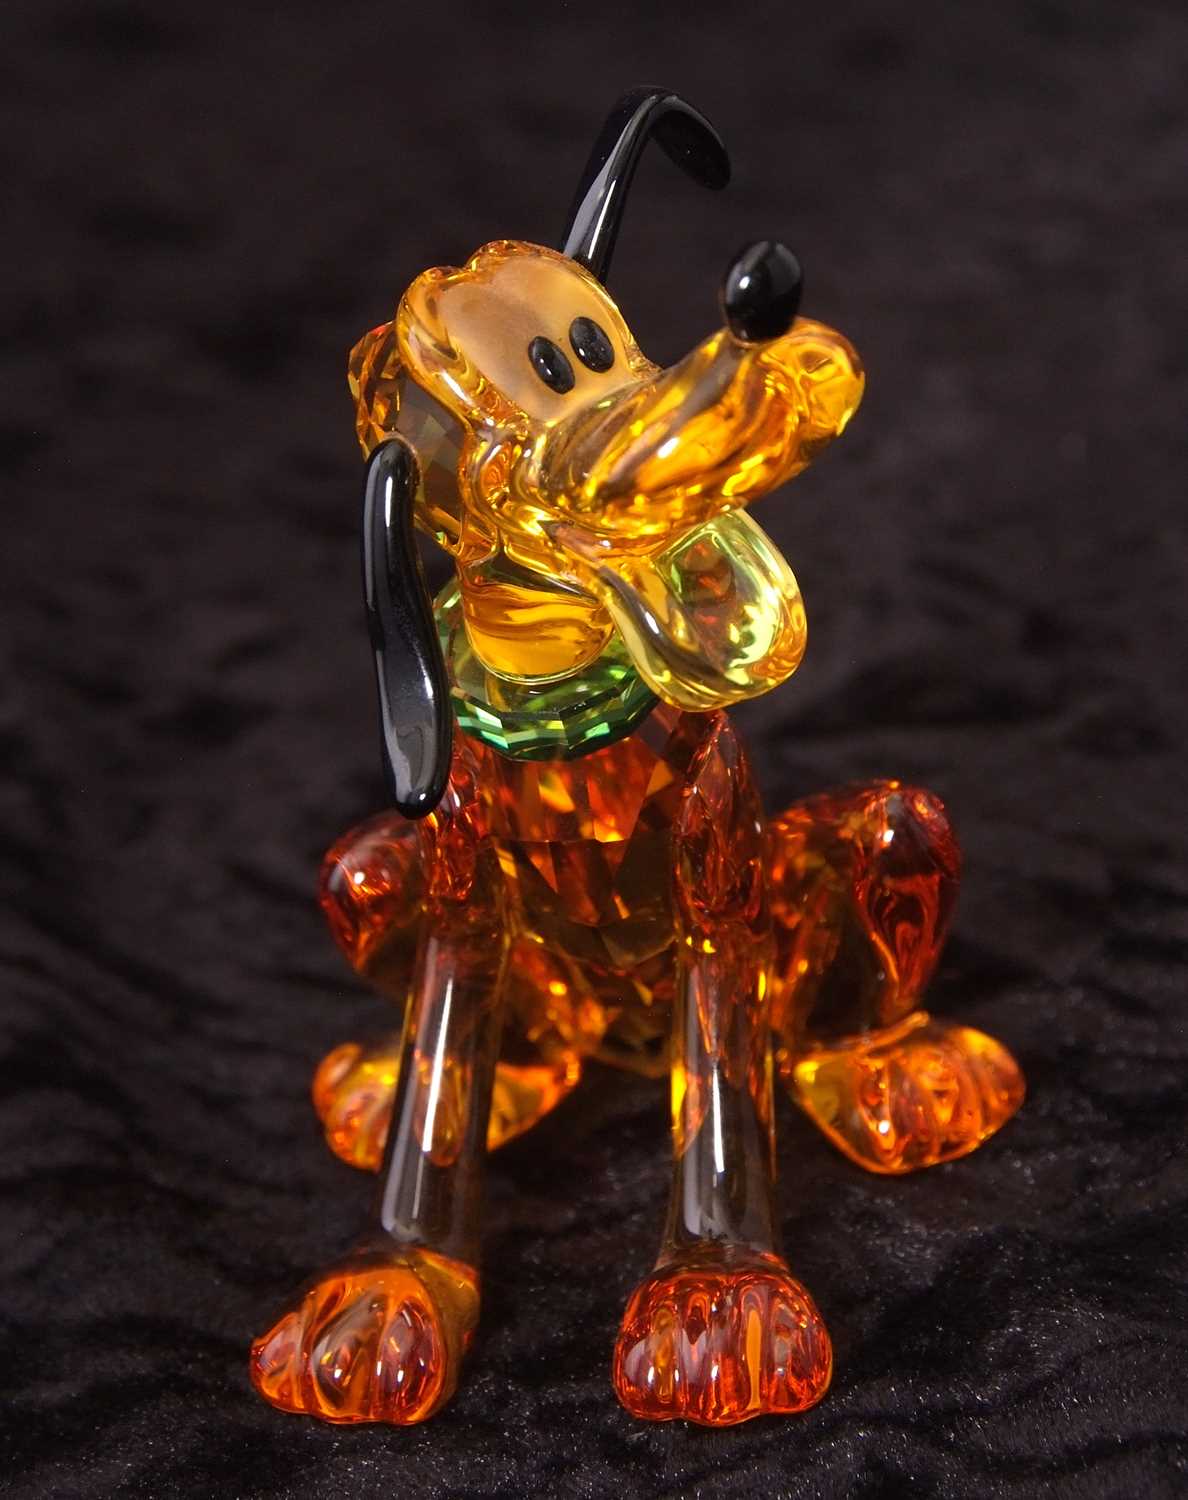 A Swarovski Disney figure of Pluto with yellow colour, black ears and tail, with original box, 9cm - Image 12 of 16